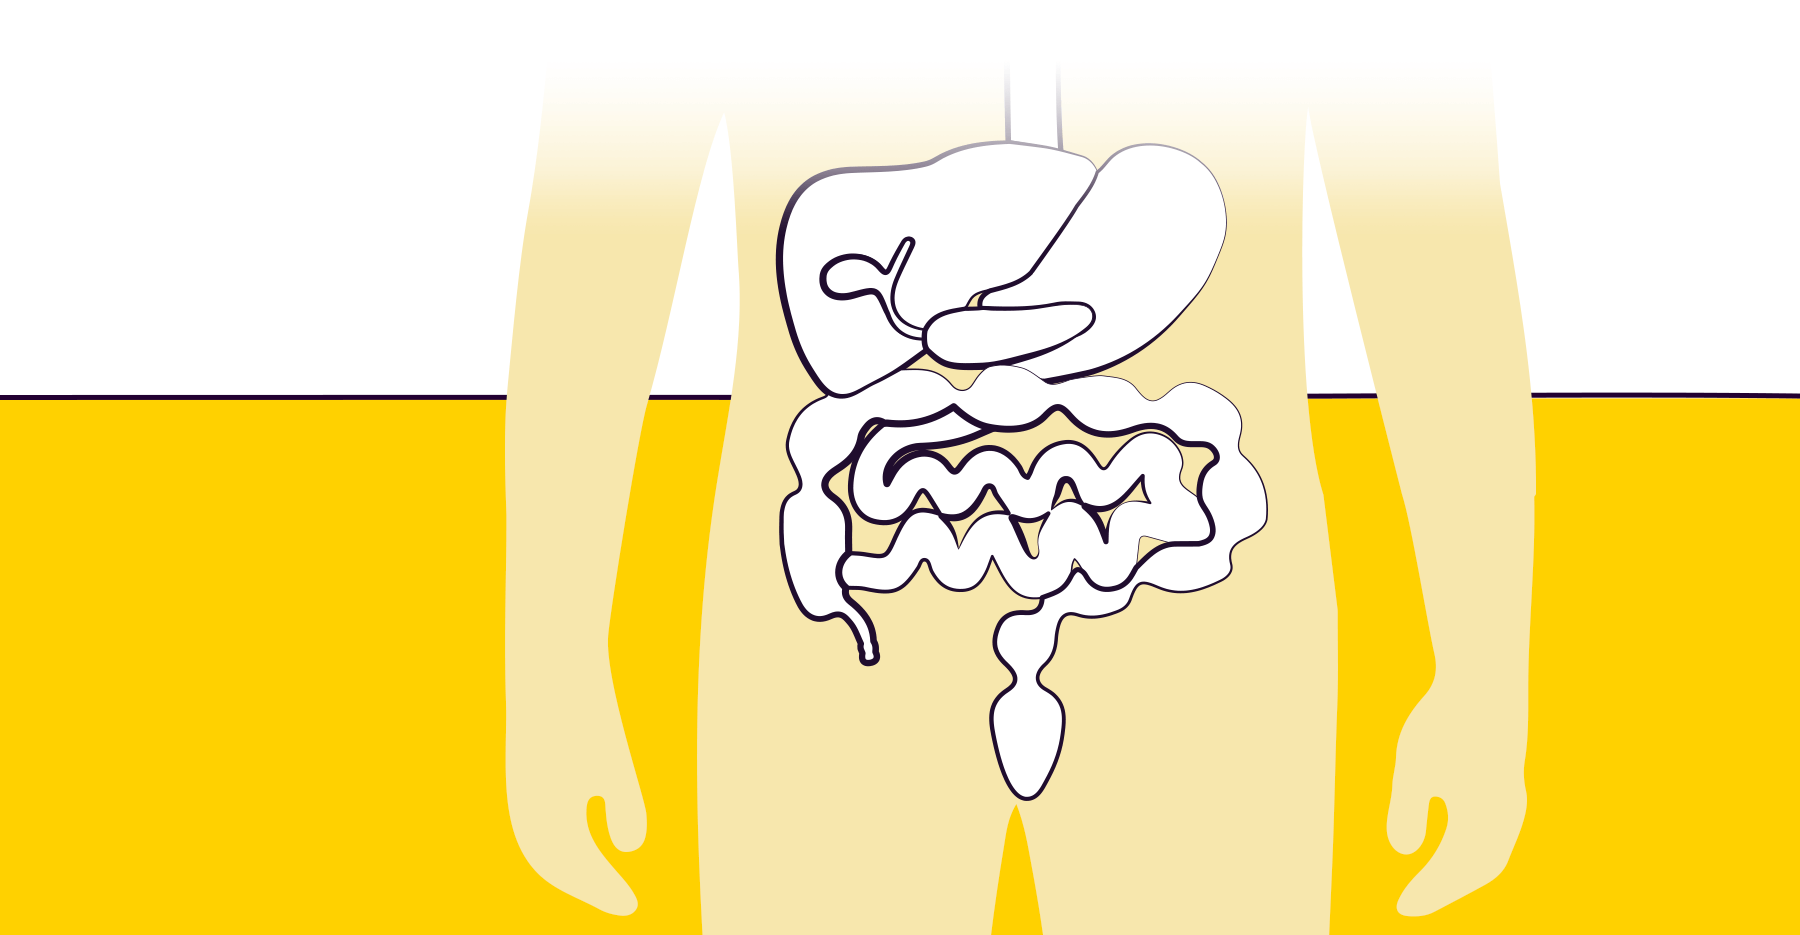 An illustration of the human digestive track over a yellow background